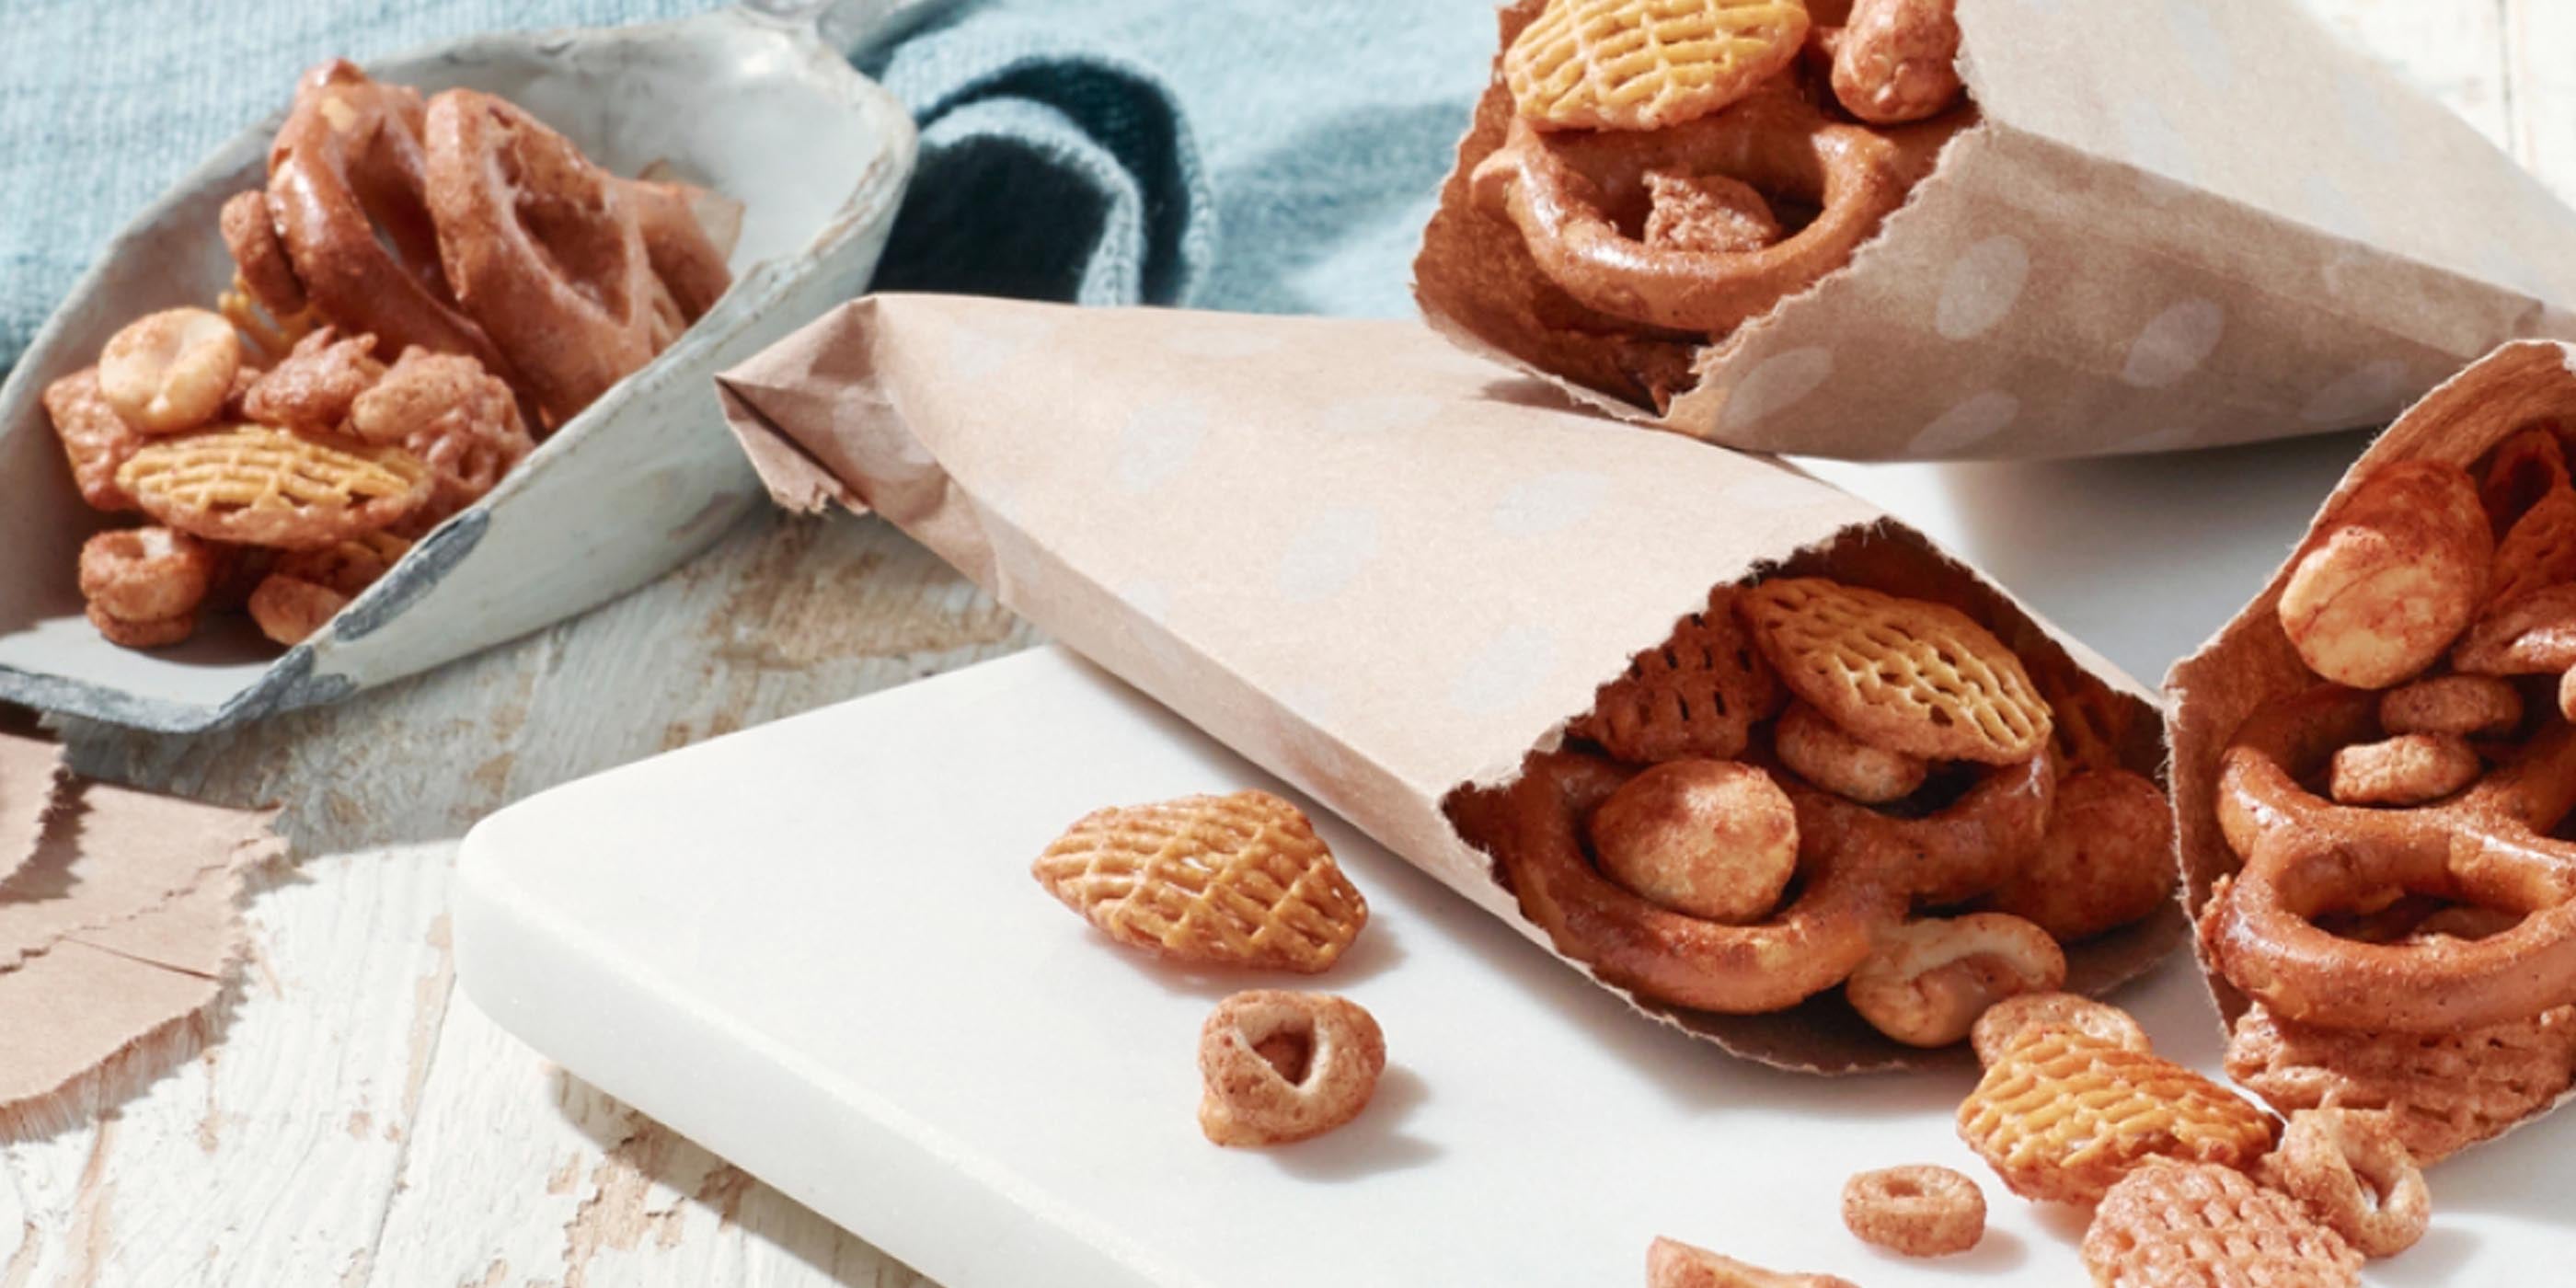 Sweet and Spicy Snack Mix